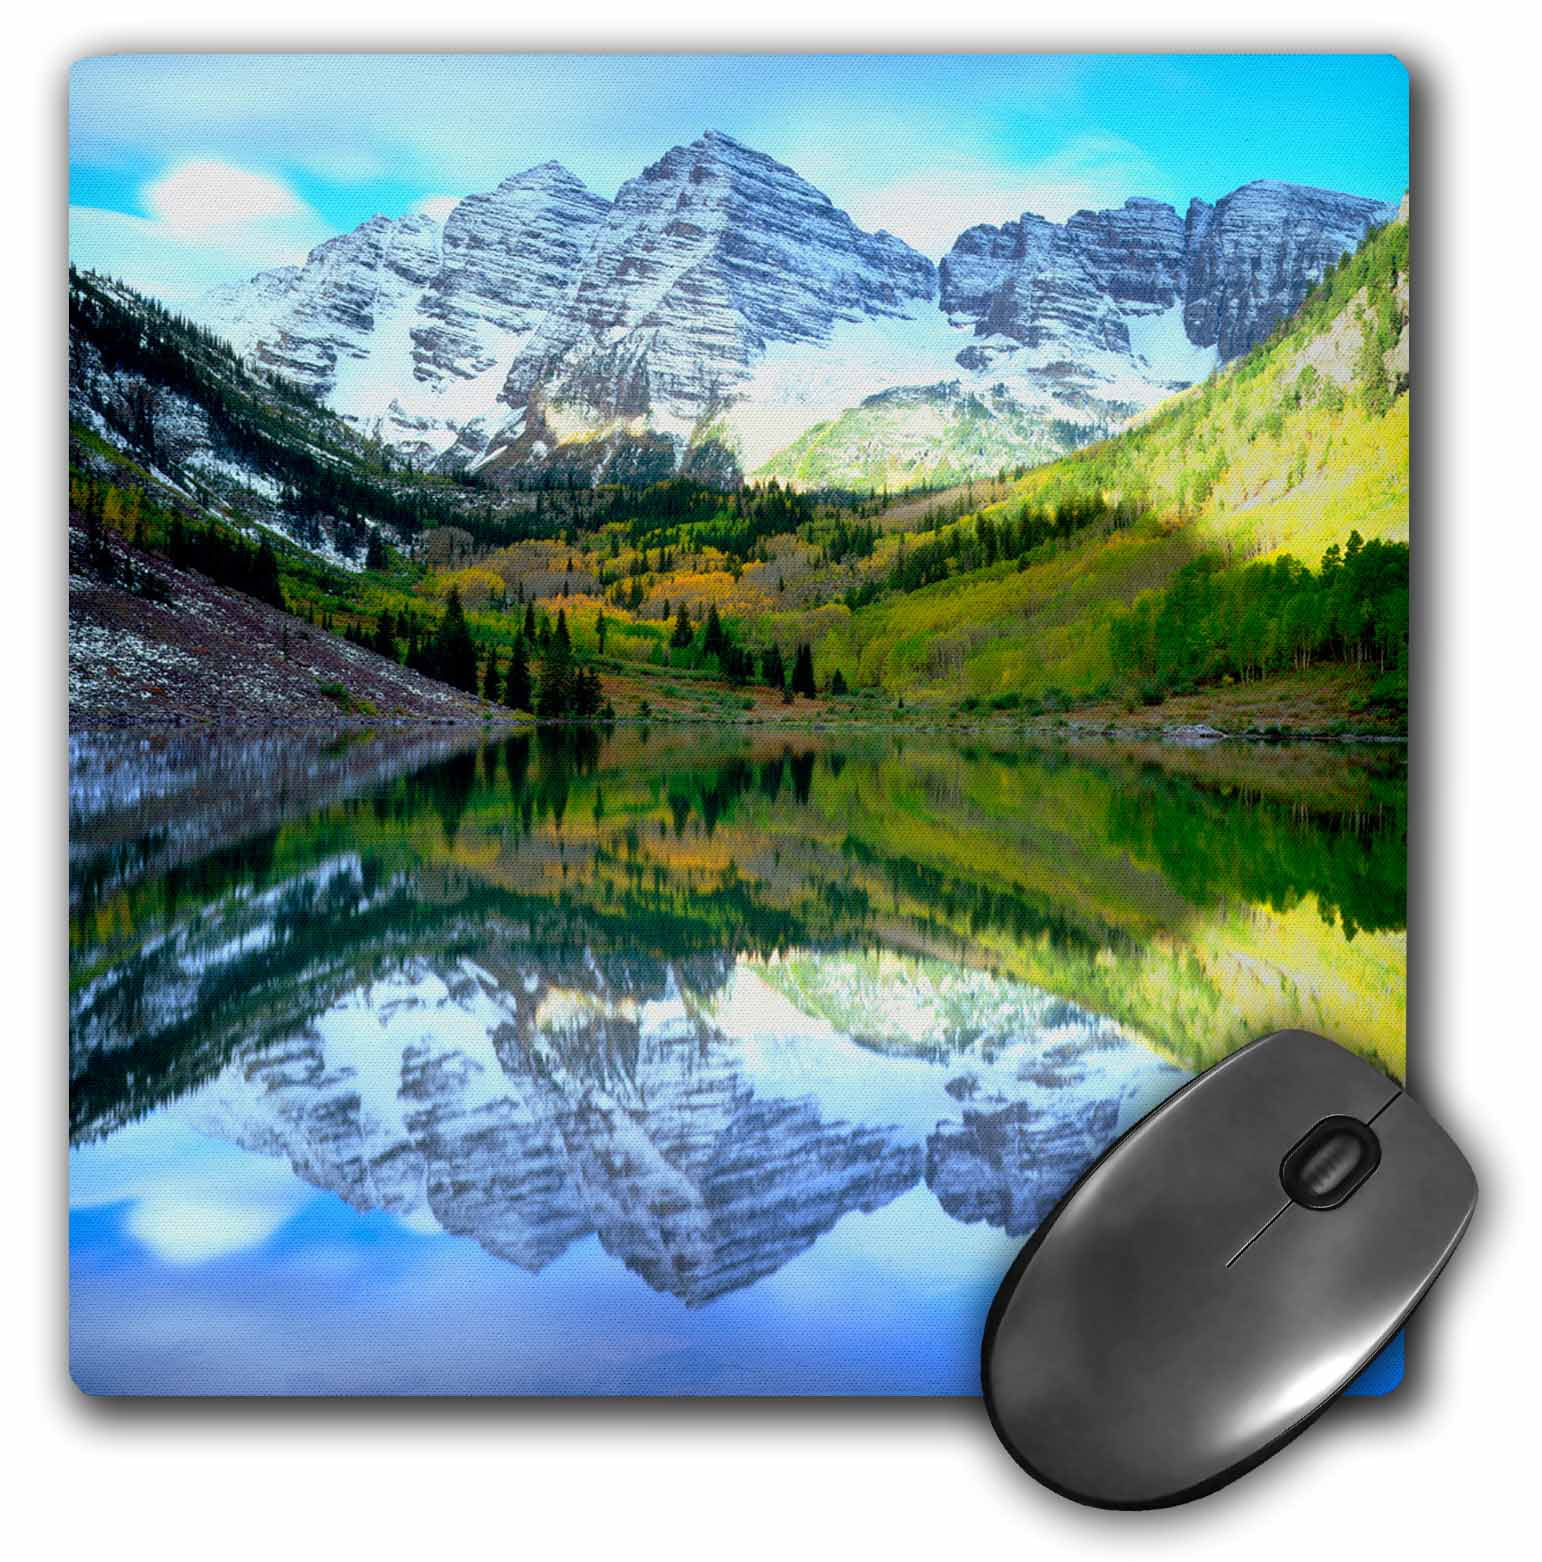 Optical 2.4G Wireless Mouse Lion Portrait Green Eyes Wild Big Cat Africa KOOLmouse